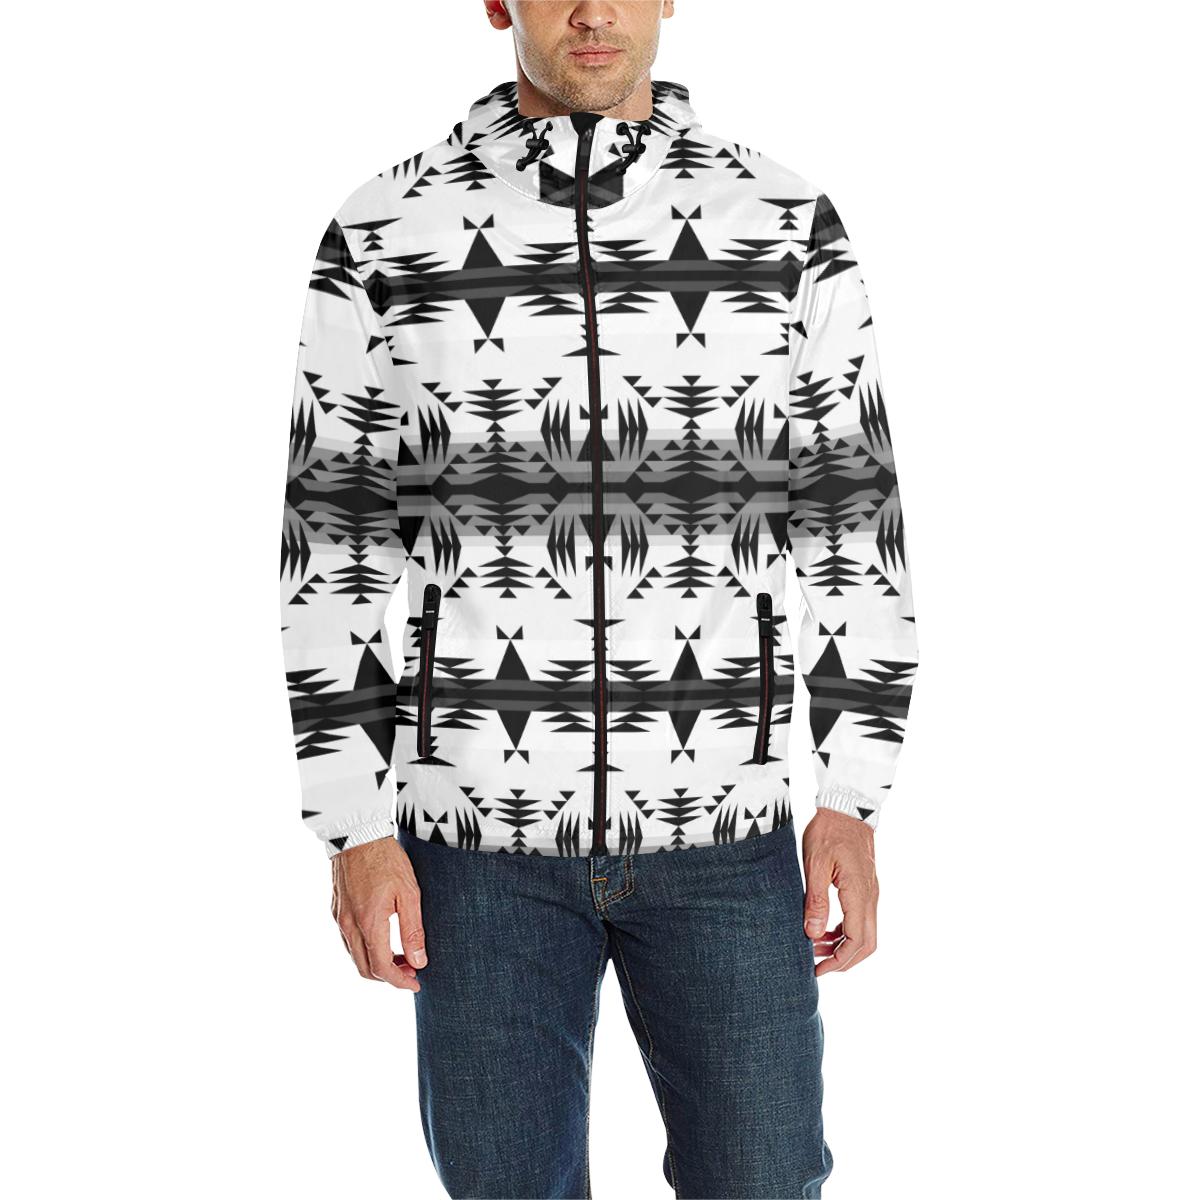 Between the Mountains White and Black Unisex Quilted Coat All Over Print Quilted Windbreaker for Men (H35) e-joyer 